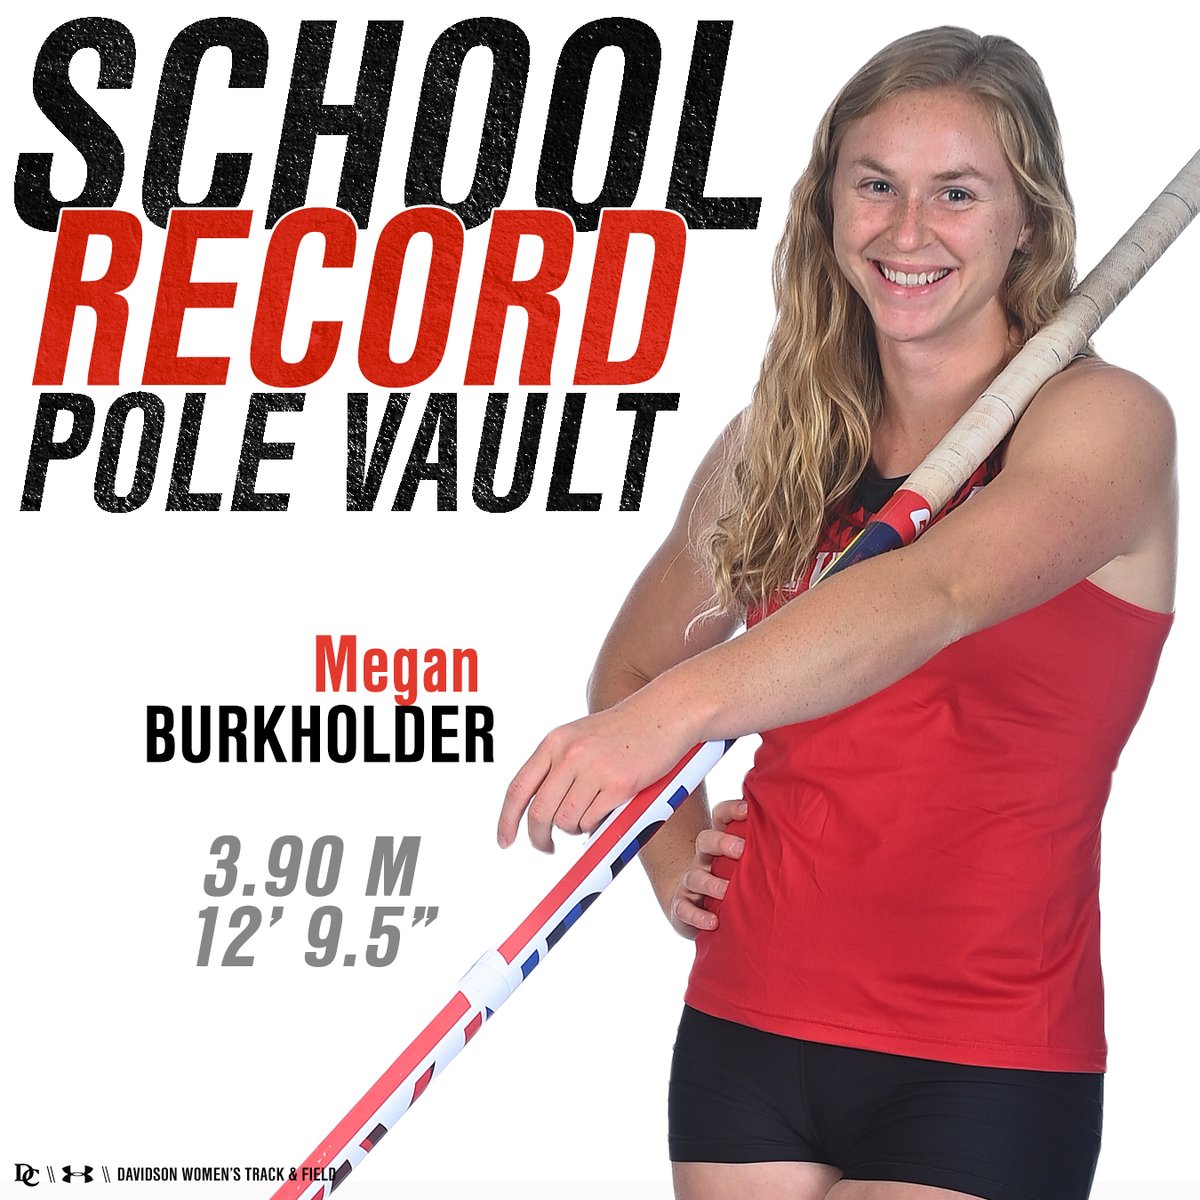 🚨 𝗦𝗖𝗛𝗢𝗢𝗟 𝗥𝗘𝗖𝗢𝗥𝗗 𝗔𝗟𝗘𝗥𝗧 🚨 Senior Megan Burkholder just broke her own school record in the Pole Vault with a height of 3.90m / 12-9.5 at the USC Open.